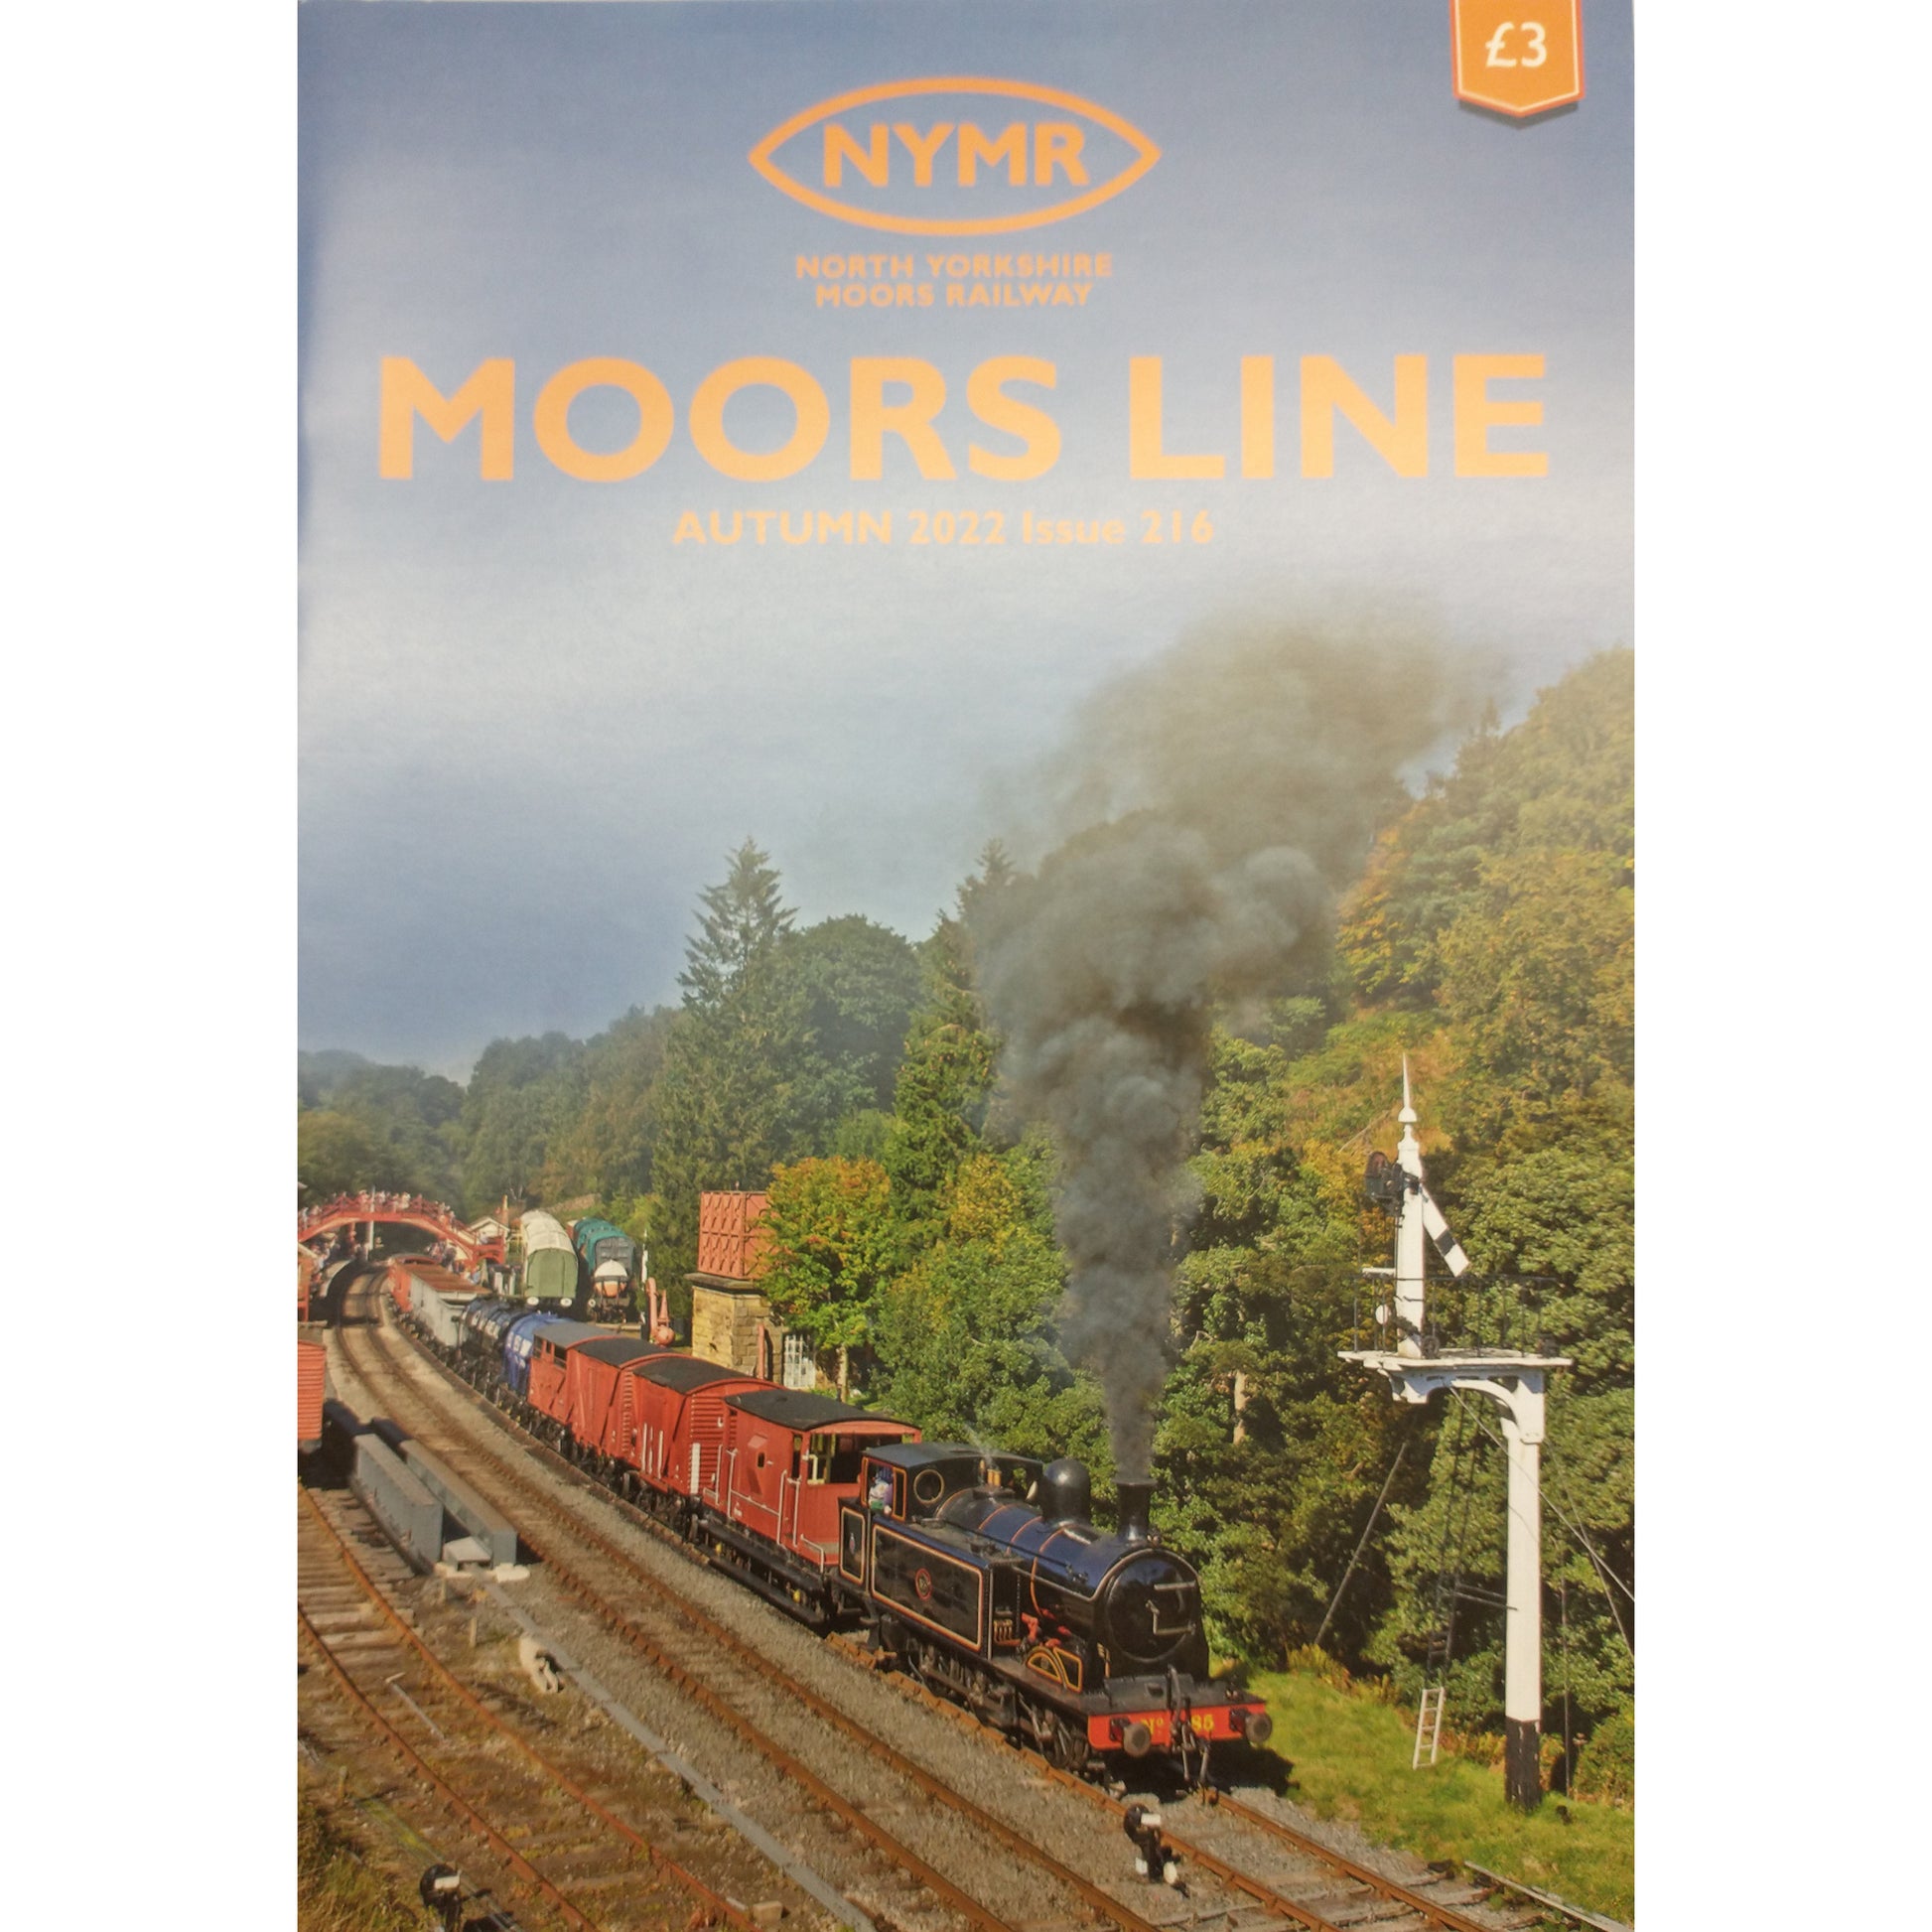 The front cover of Moos Line 216 with the NYMR logo and the photograph of a black steam locomotive at Goathland station with a signal in the foreground.